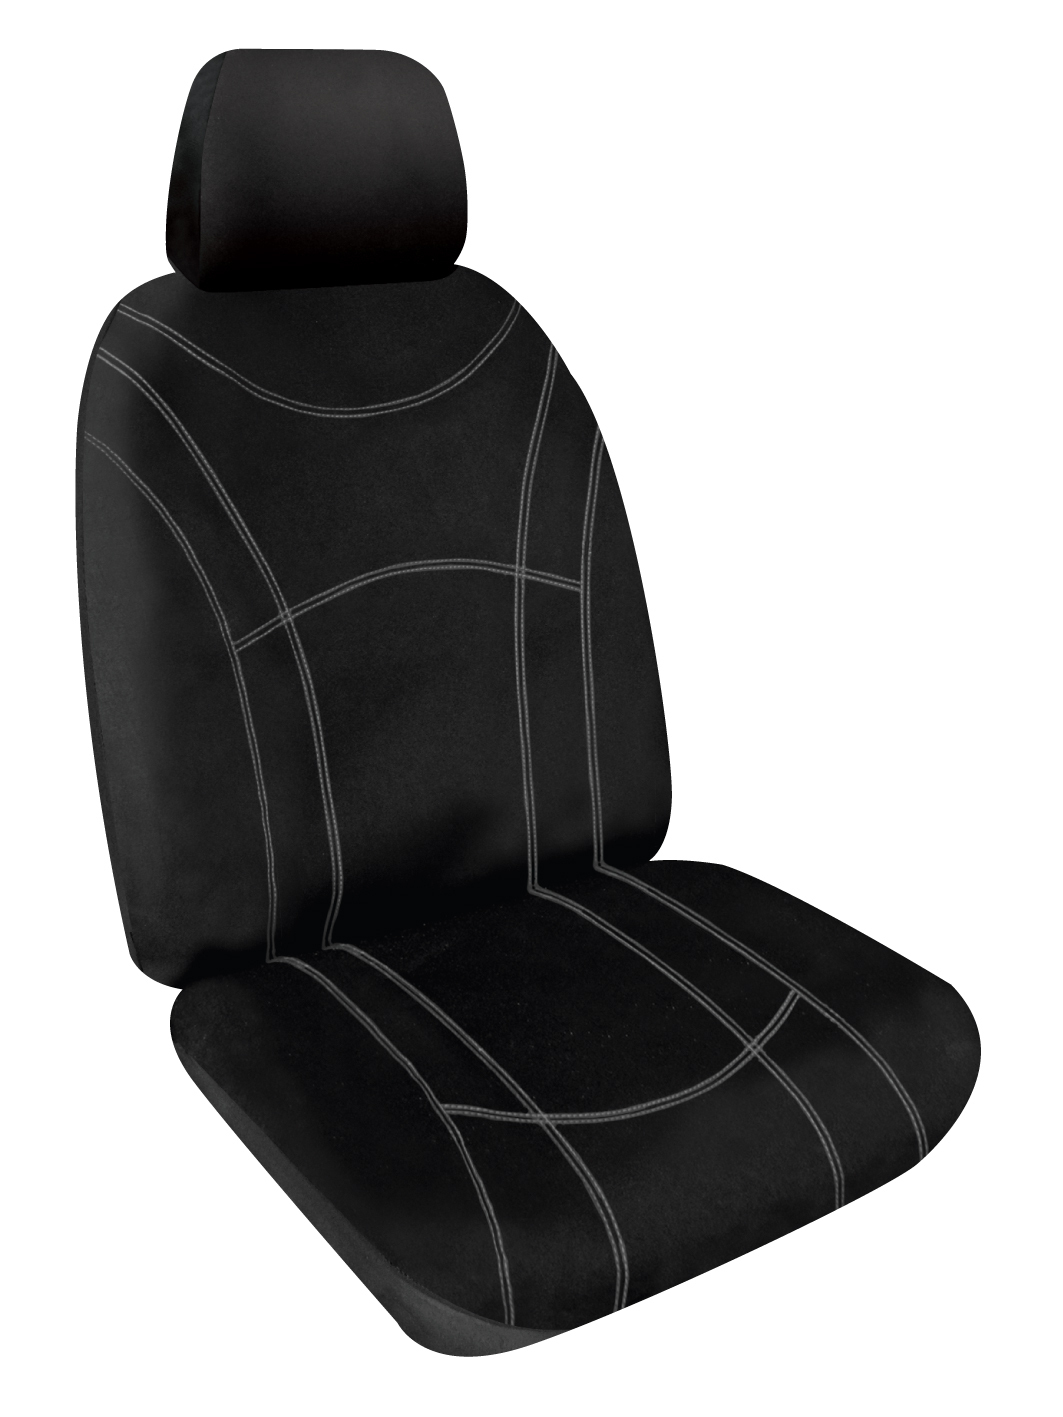 SPERLING FRONT ROW SEAT COVERS TO SUIT TOYOTA LANDCRUISER (200 SERIES) GXL, 8 SEATER 2007 - 2009